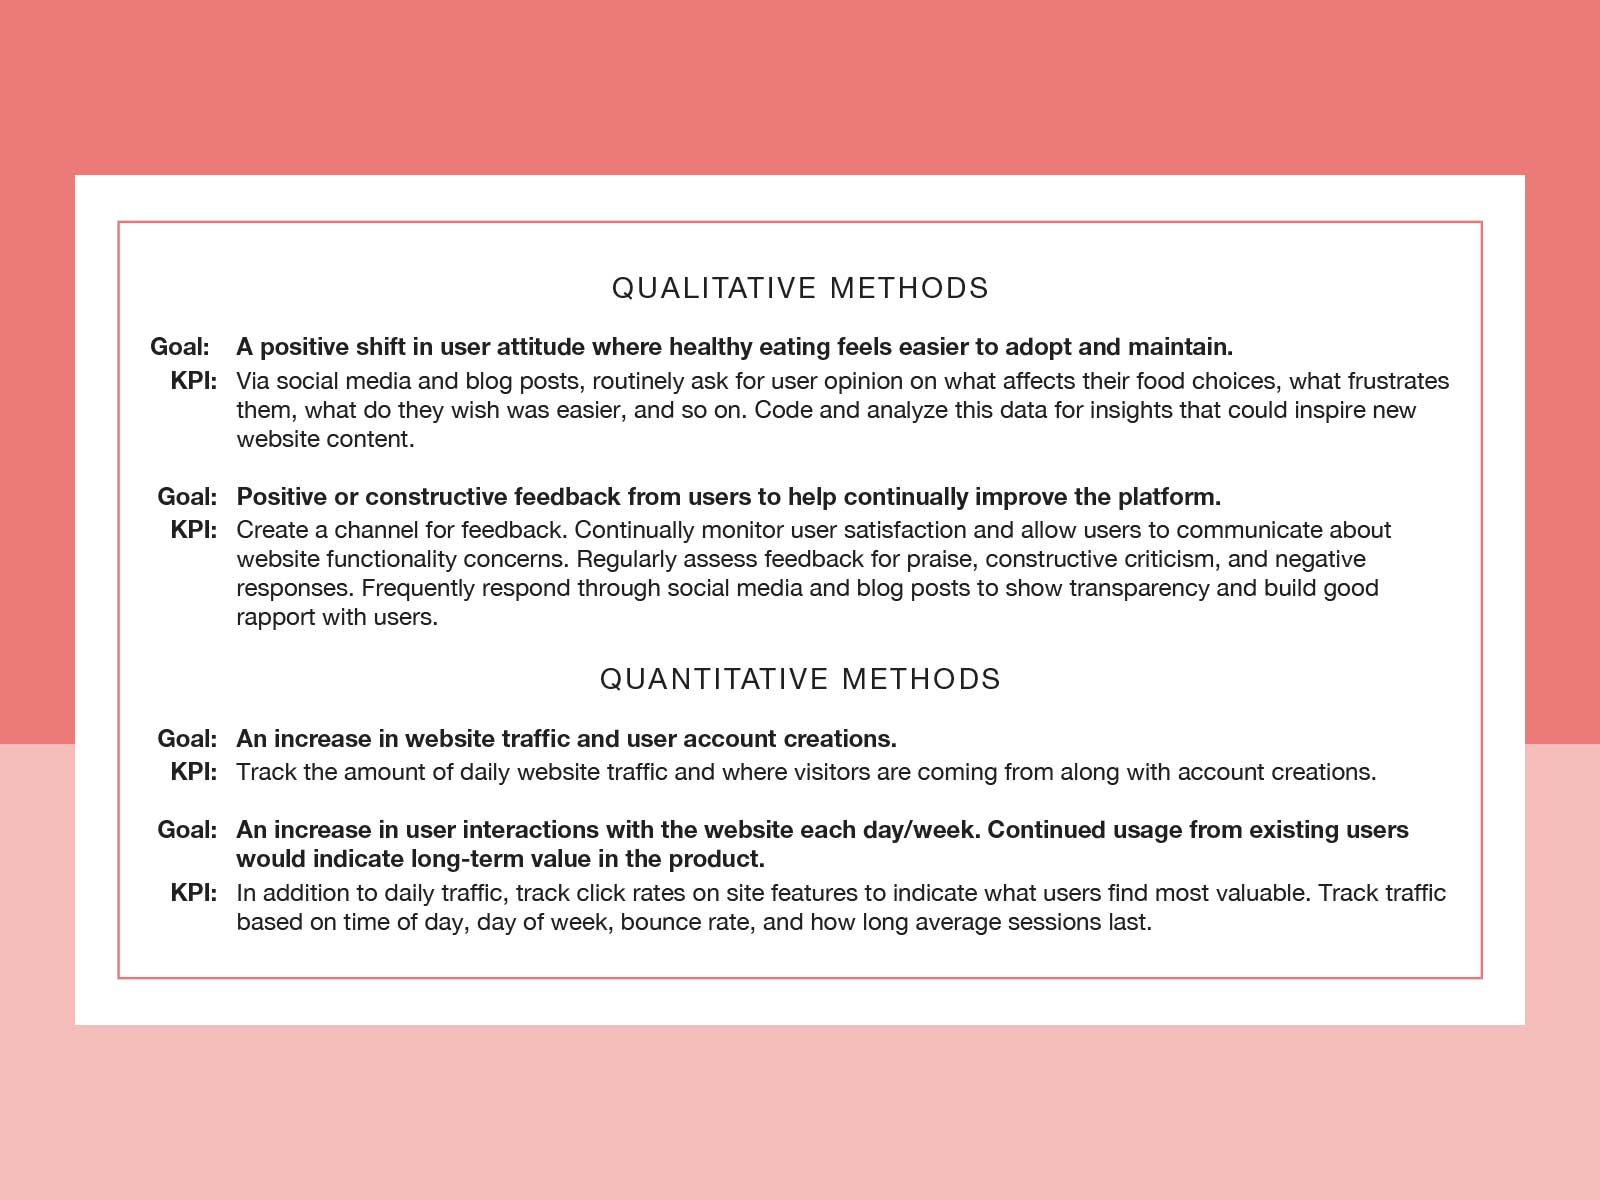 List of Qualitative and Quantitative methods for tracking Key Performance Indicators after website launch